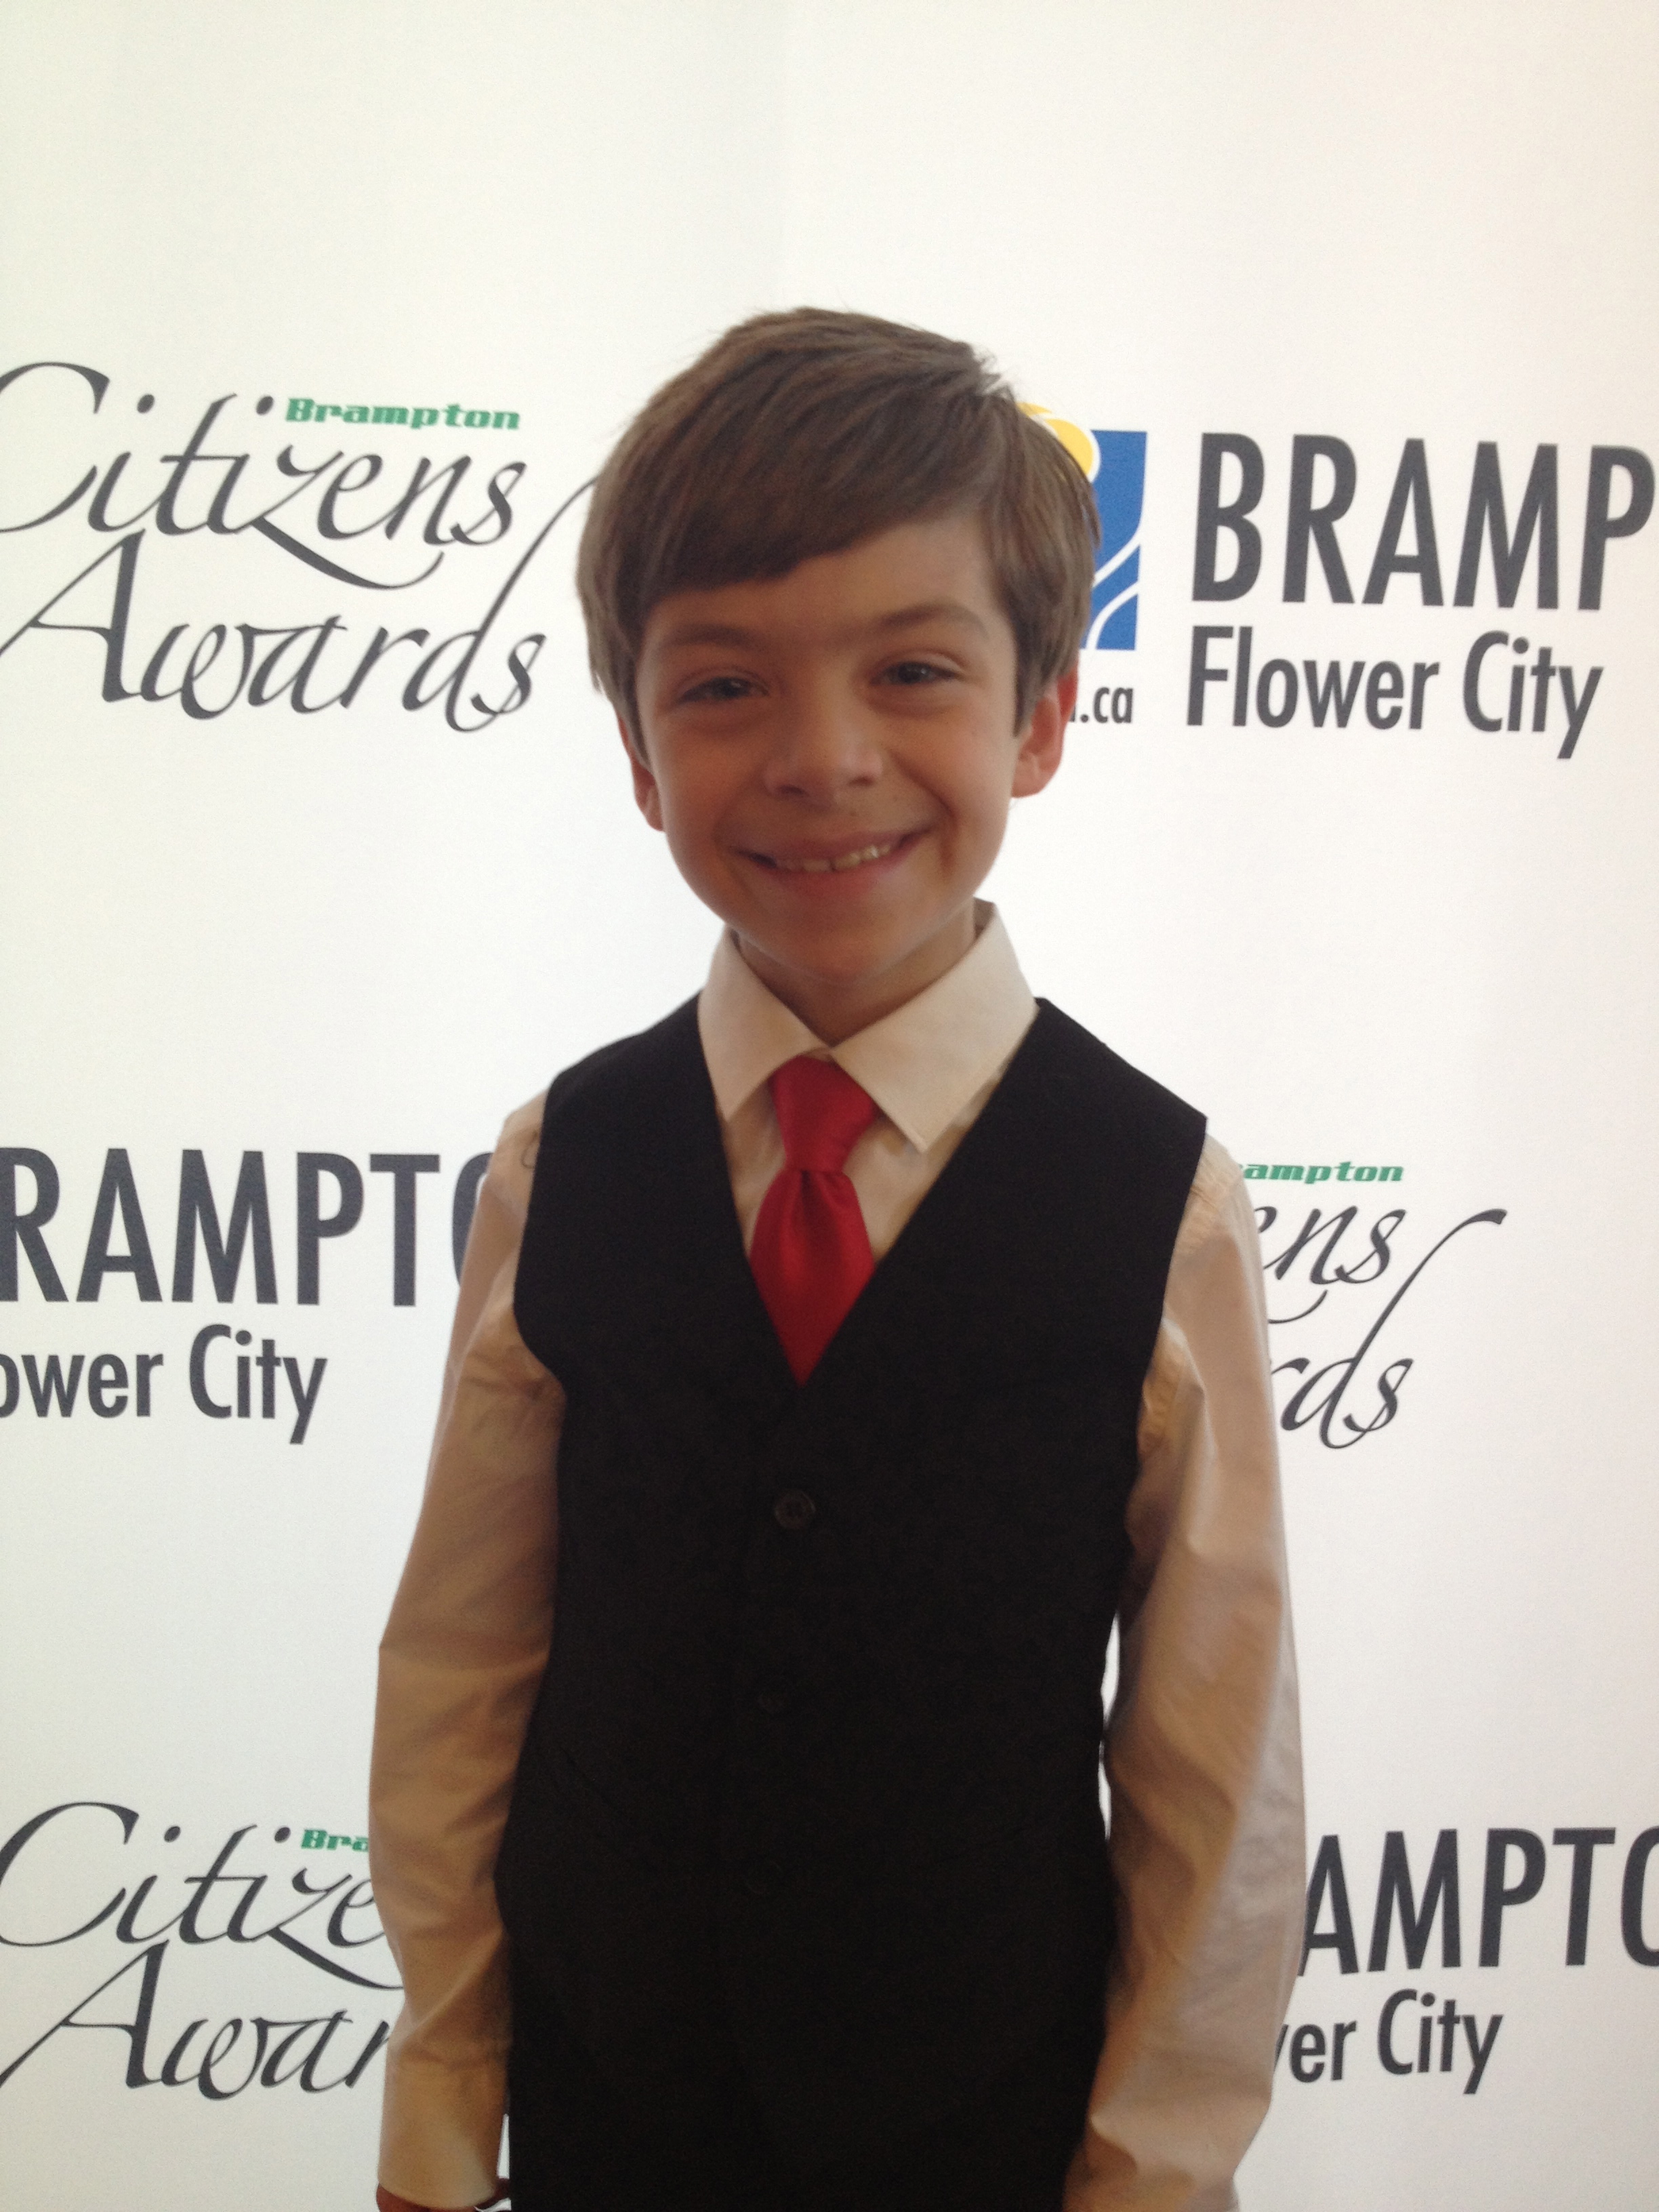 Peter received an Arts Acclaim Award from The City Of Brampton for his work in film and televsion 2012